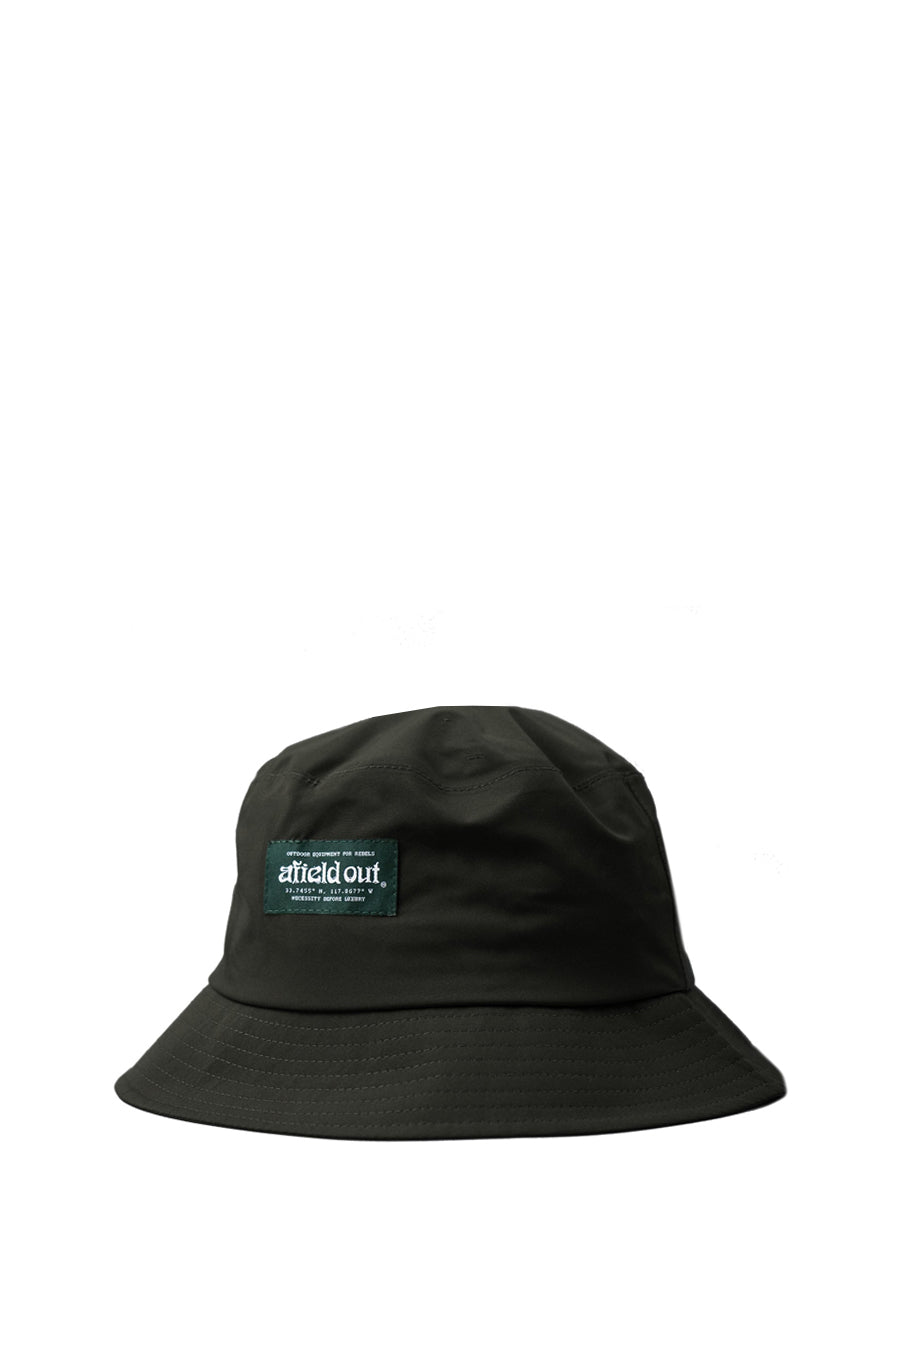 AFIELD OUT DARBY BUCKET HAT BLACK